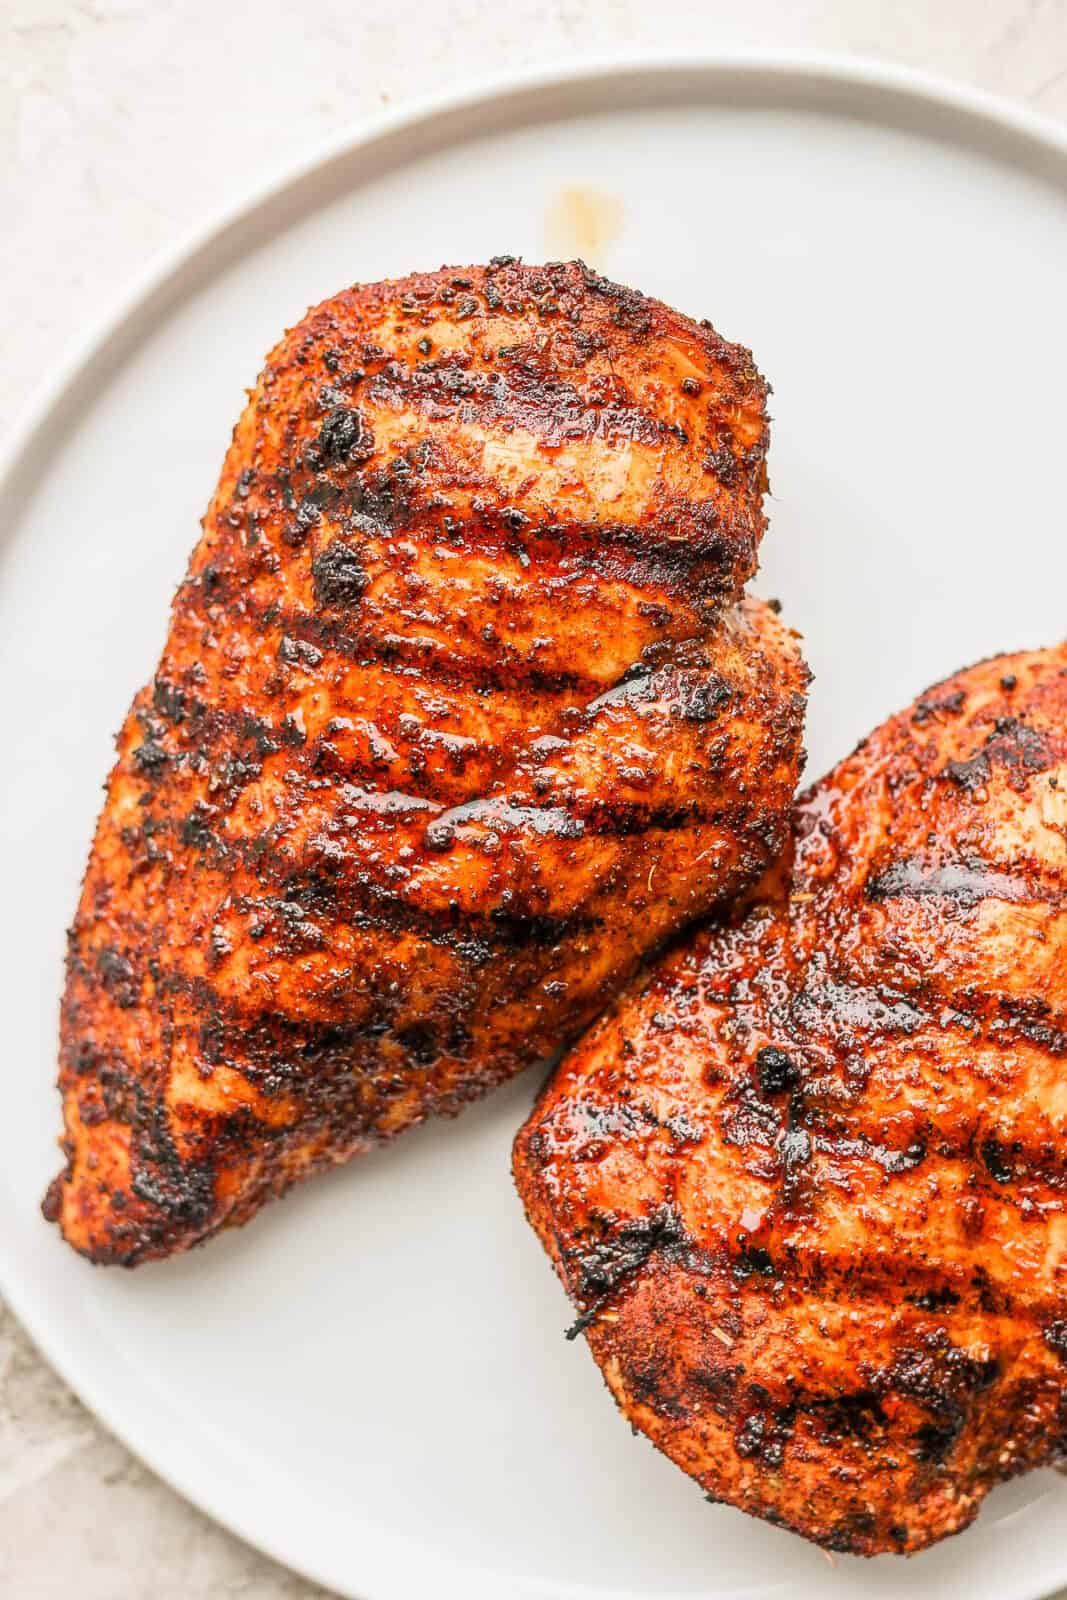 Chipotle seasoning on grilled chicken breasts.